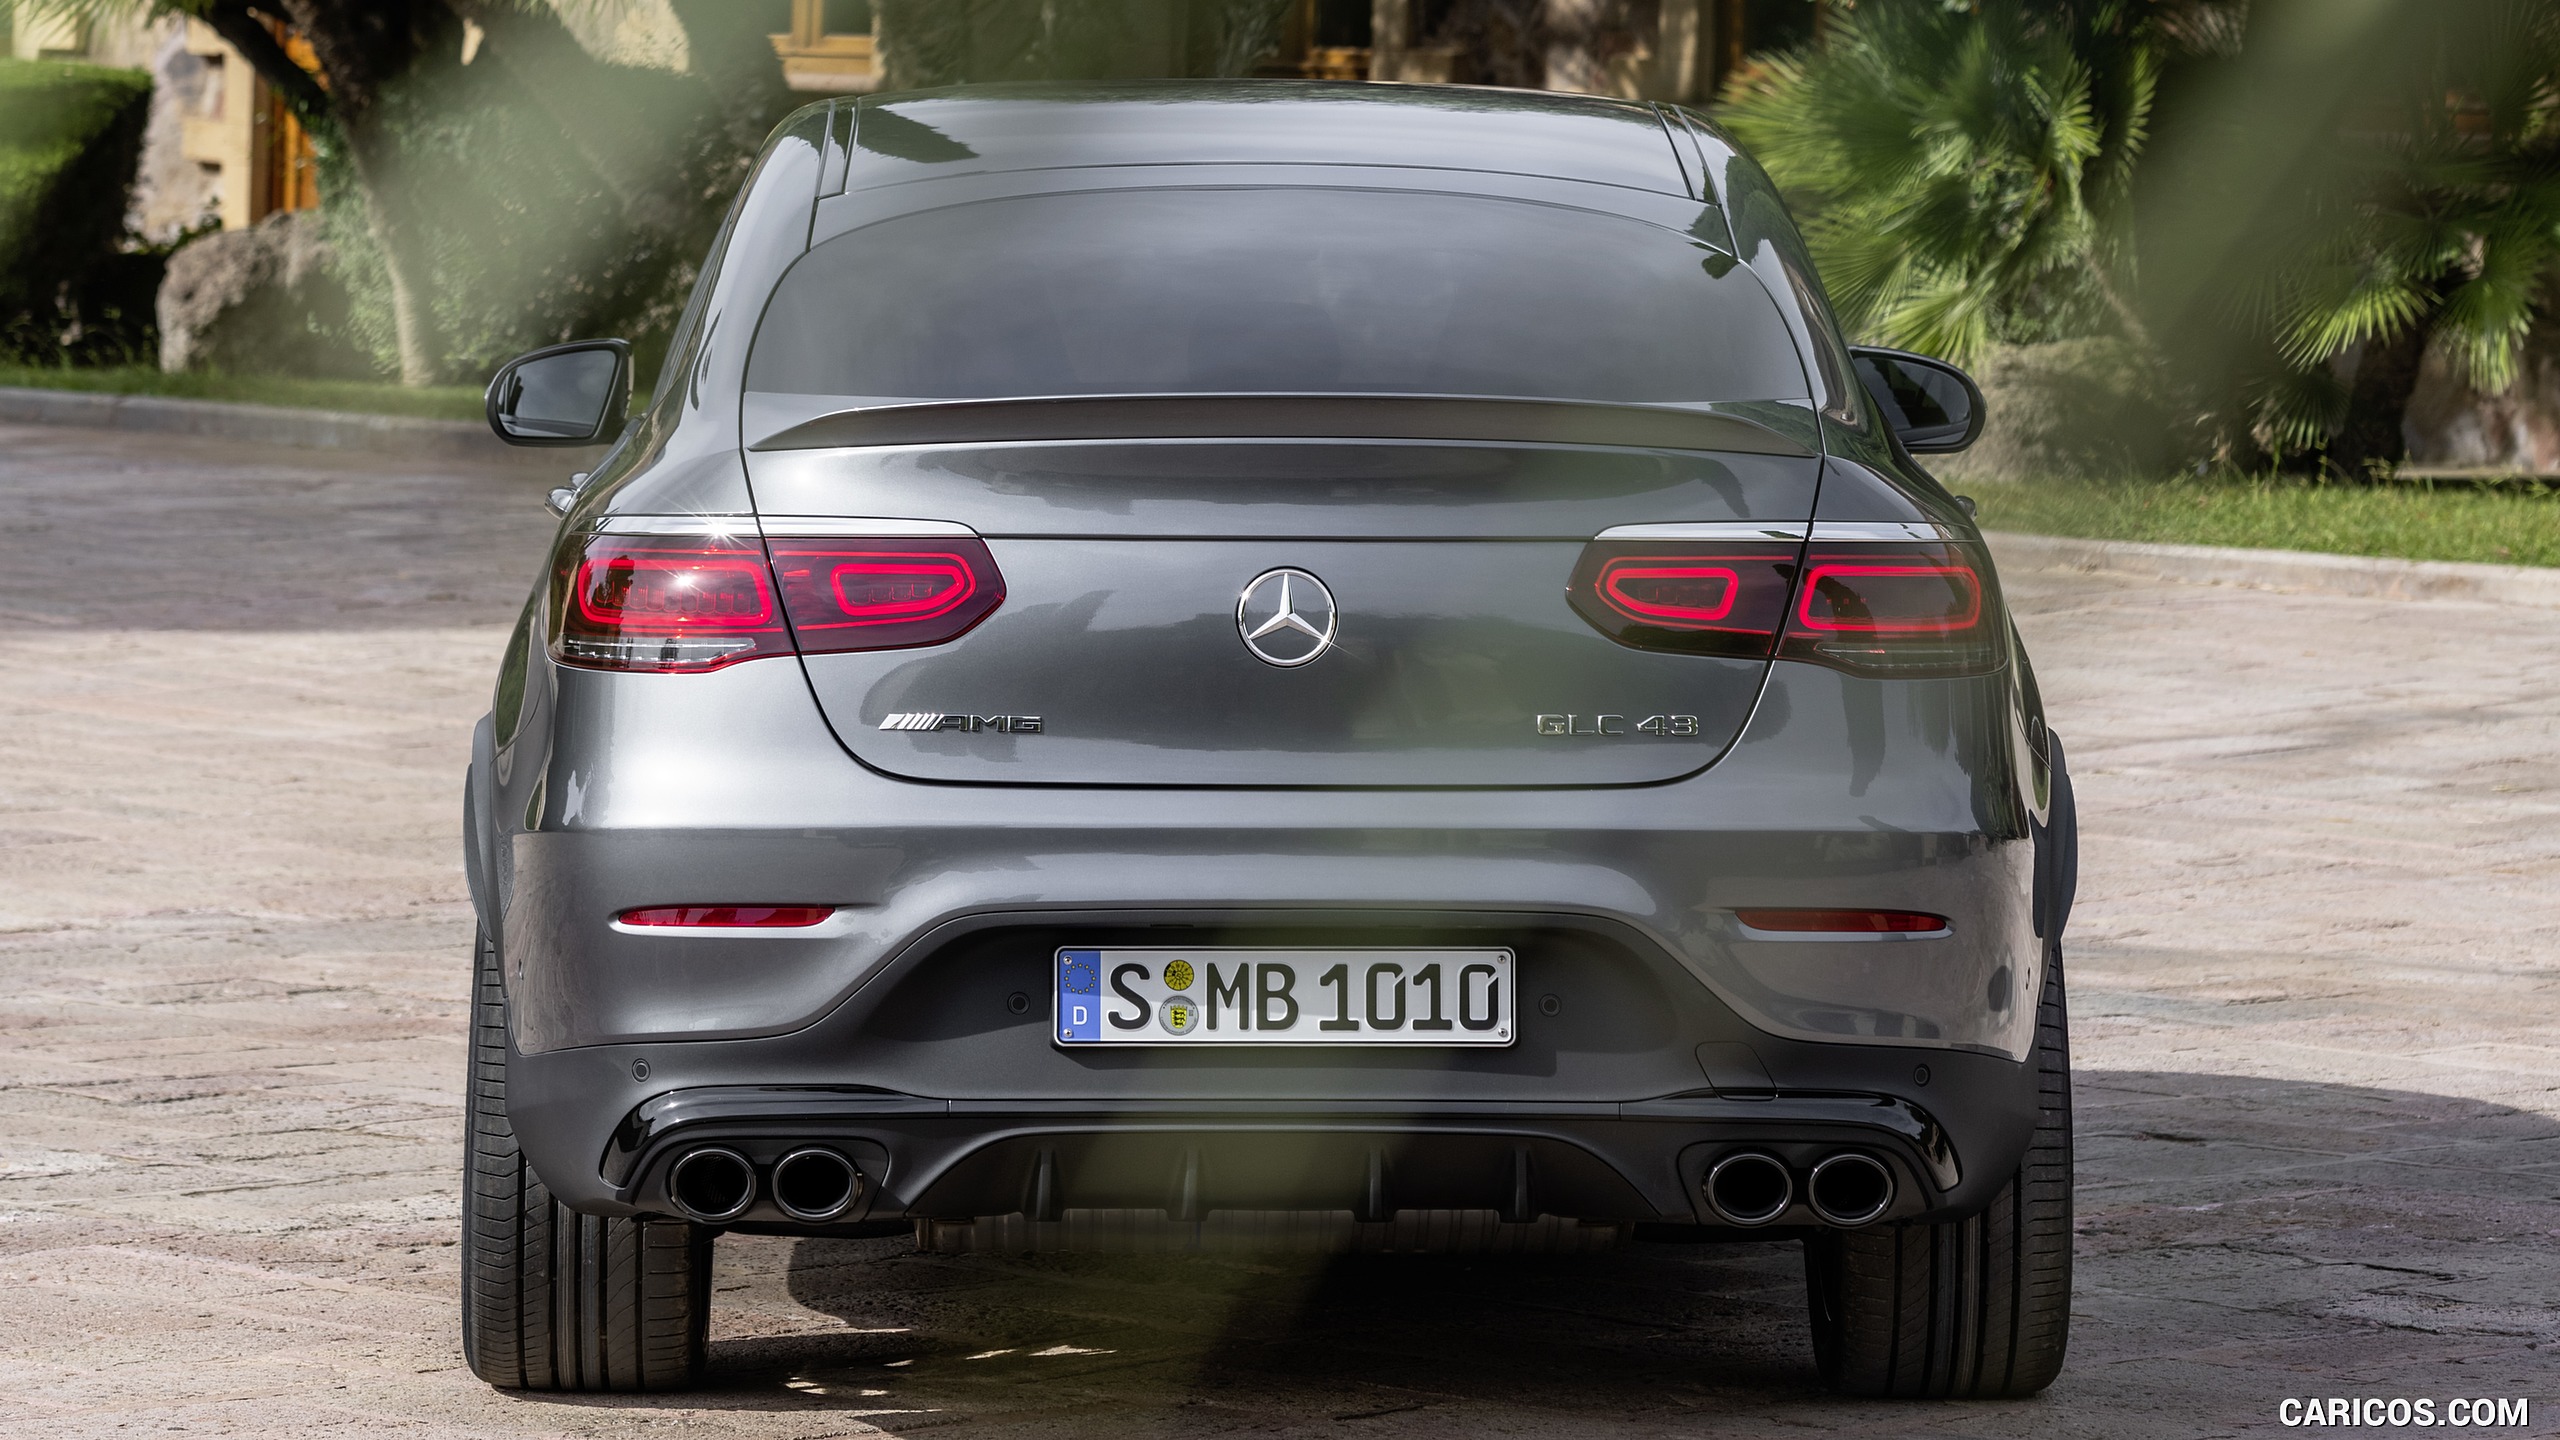 2020 Mercedes-AMG GLC 43 4MATIC Coupe - Rear, #16 of 173